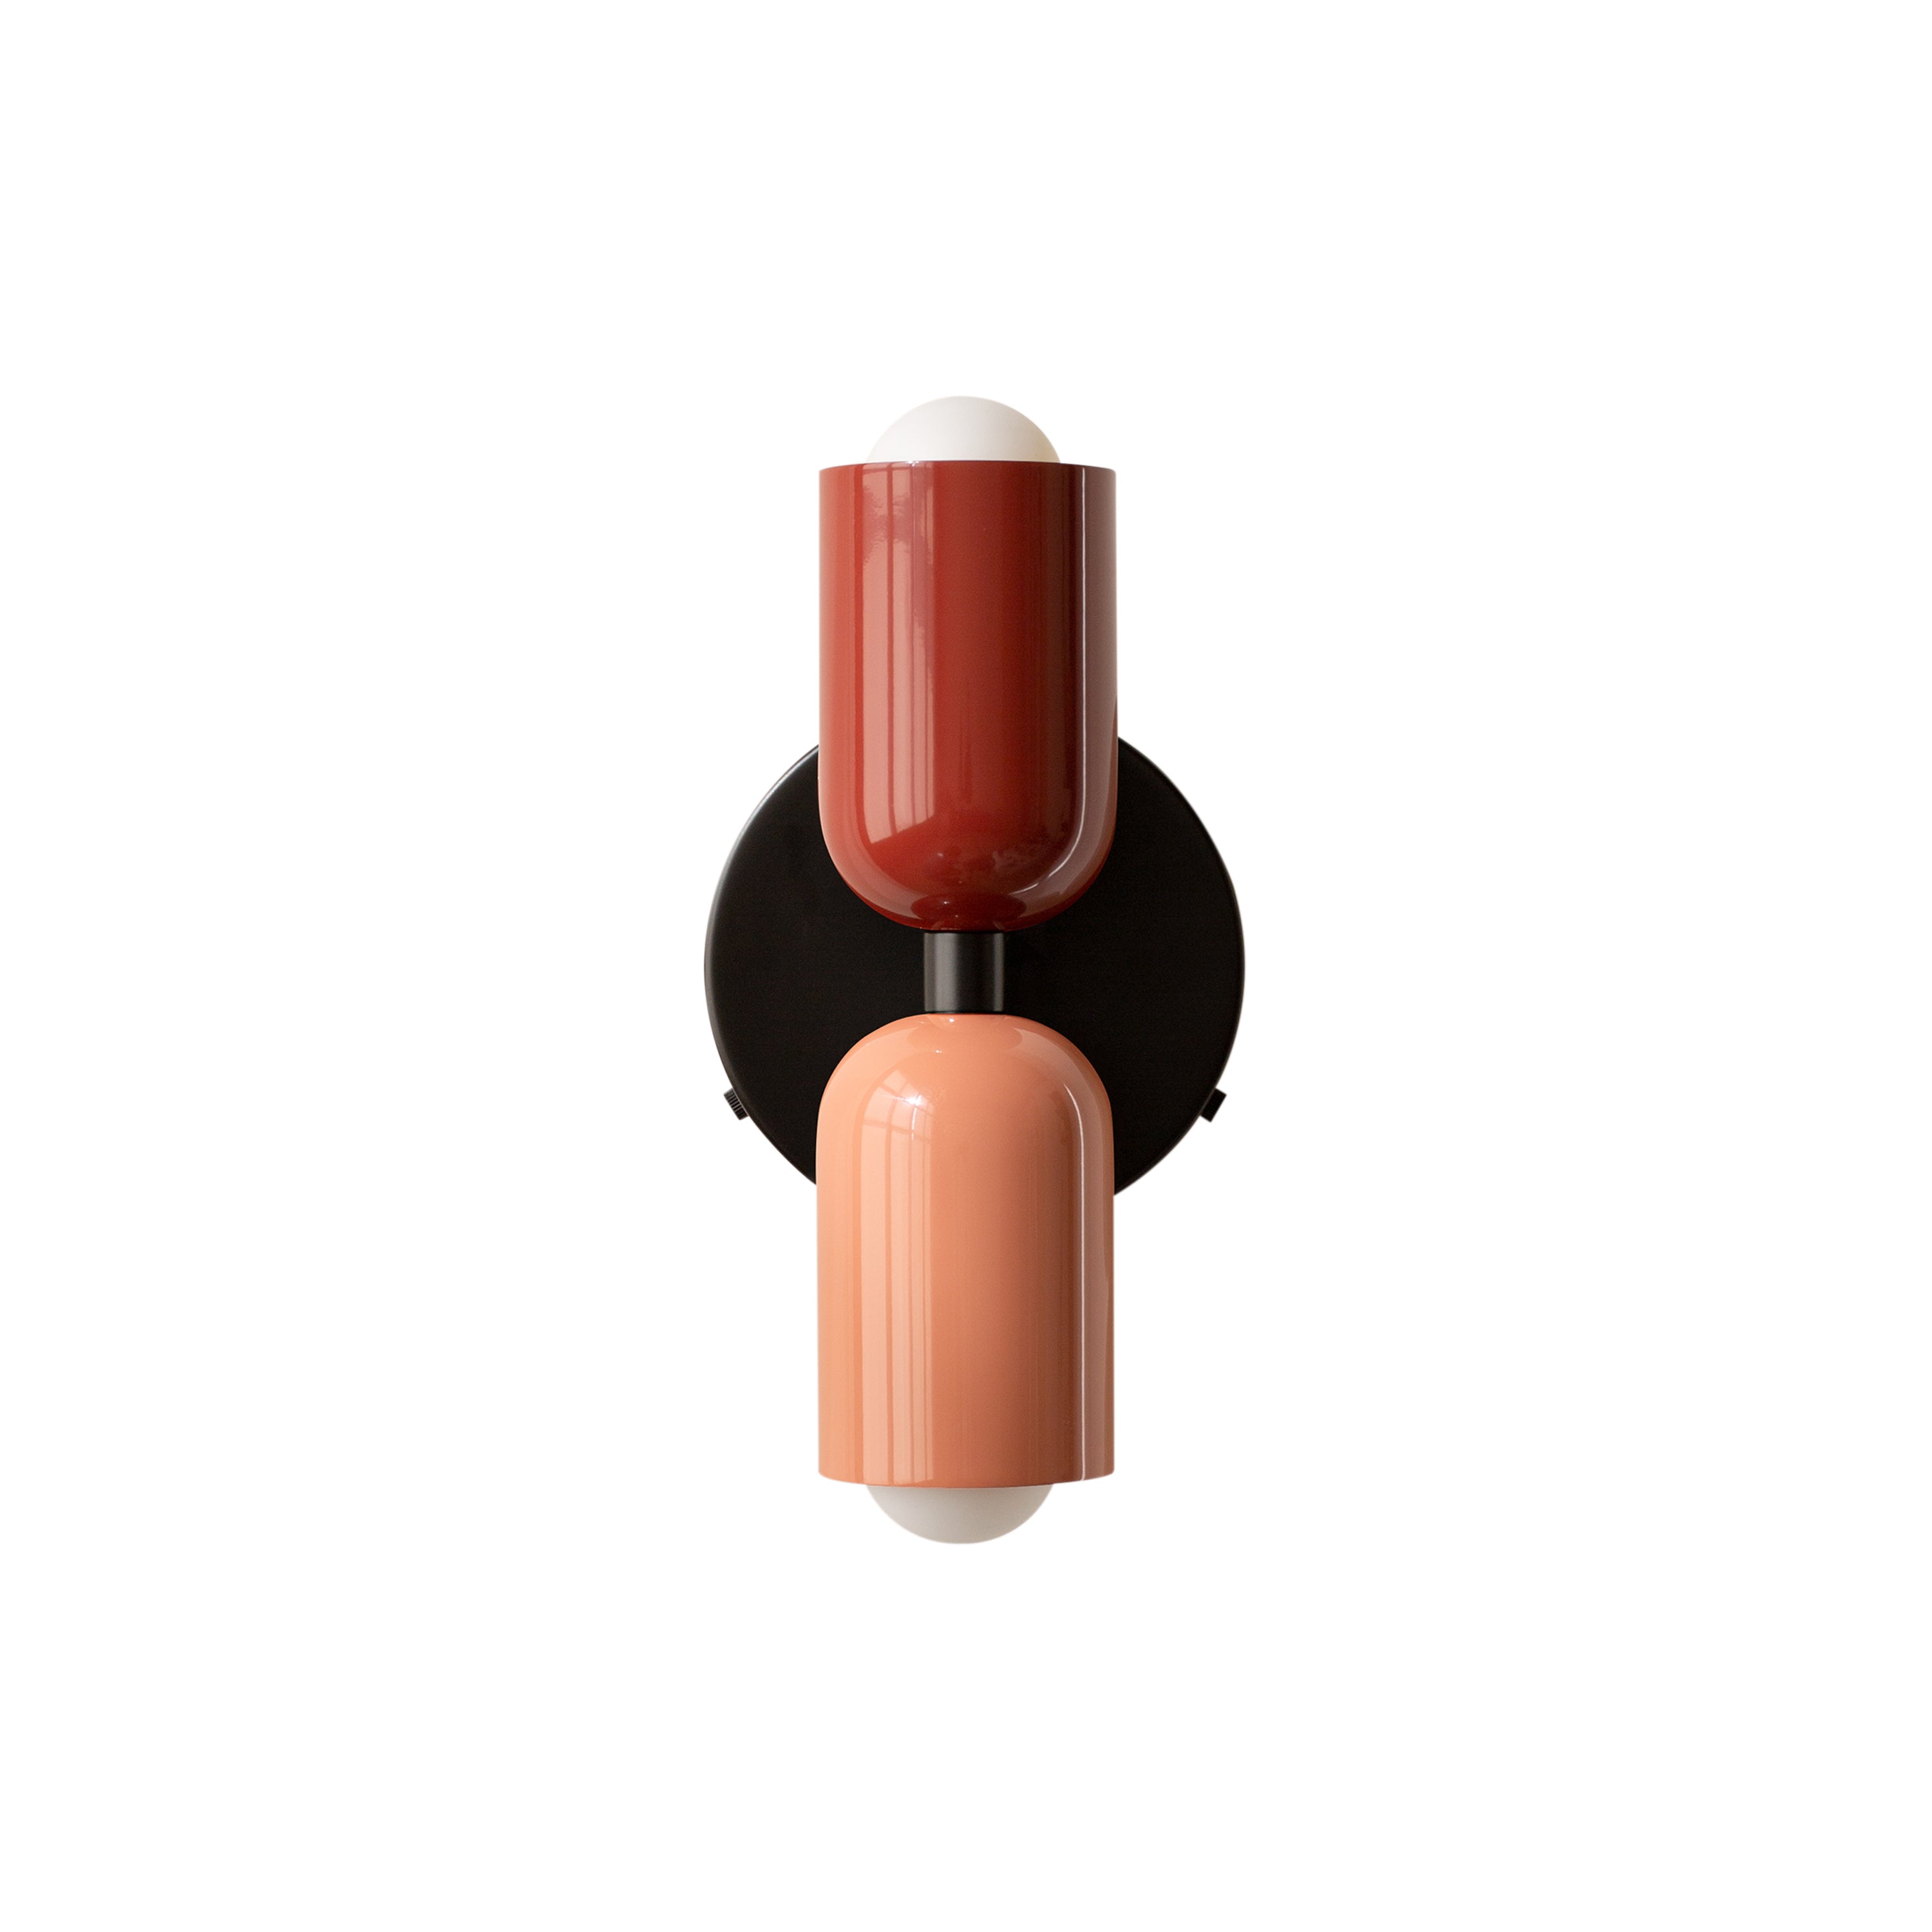 Up Down Sconce: Duo-Tone + Oxide Red + Peach + Black